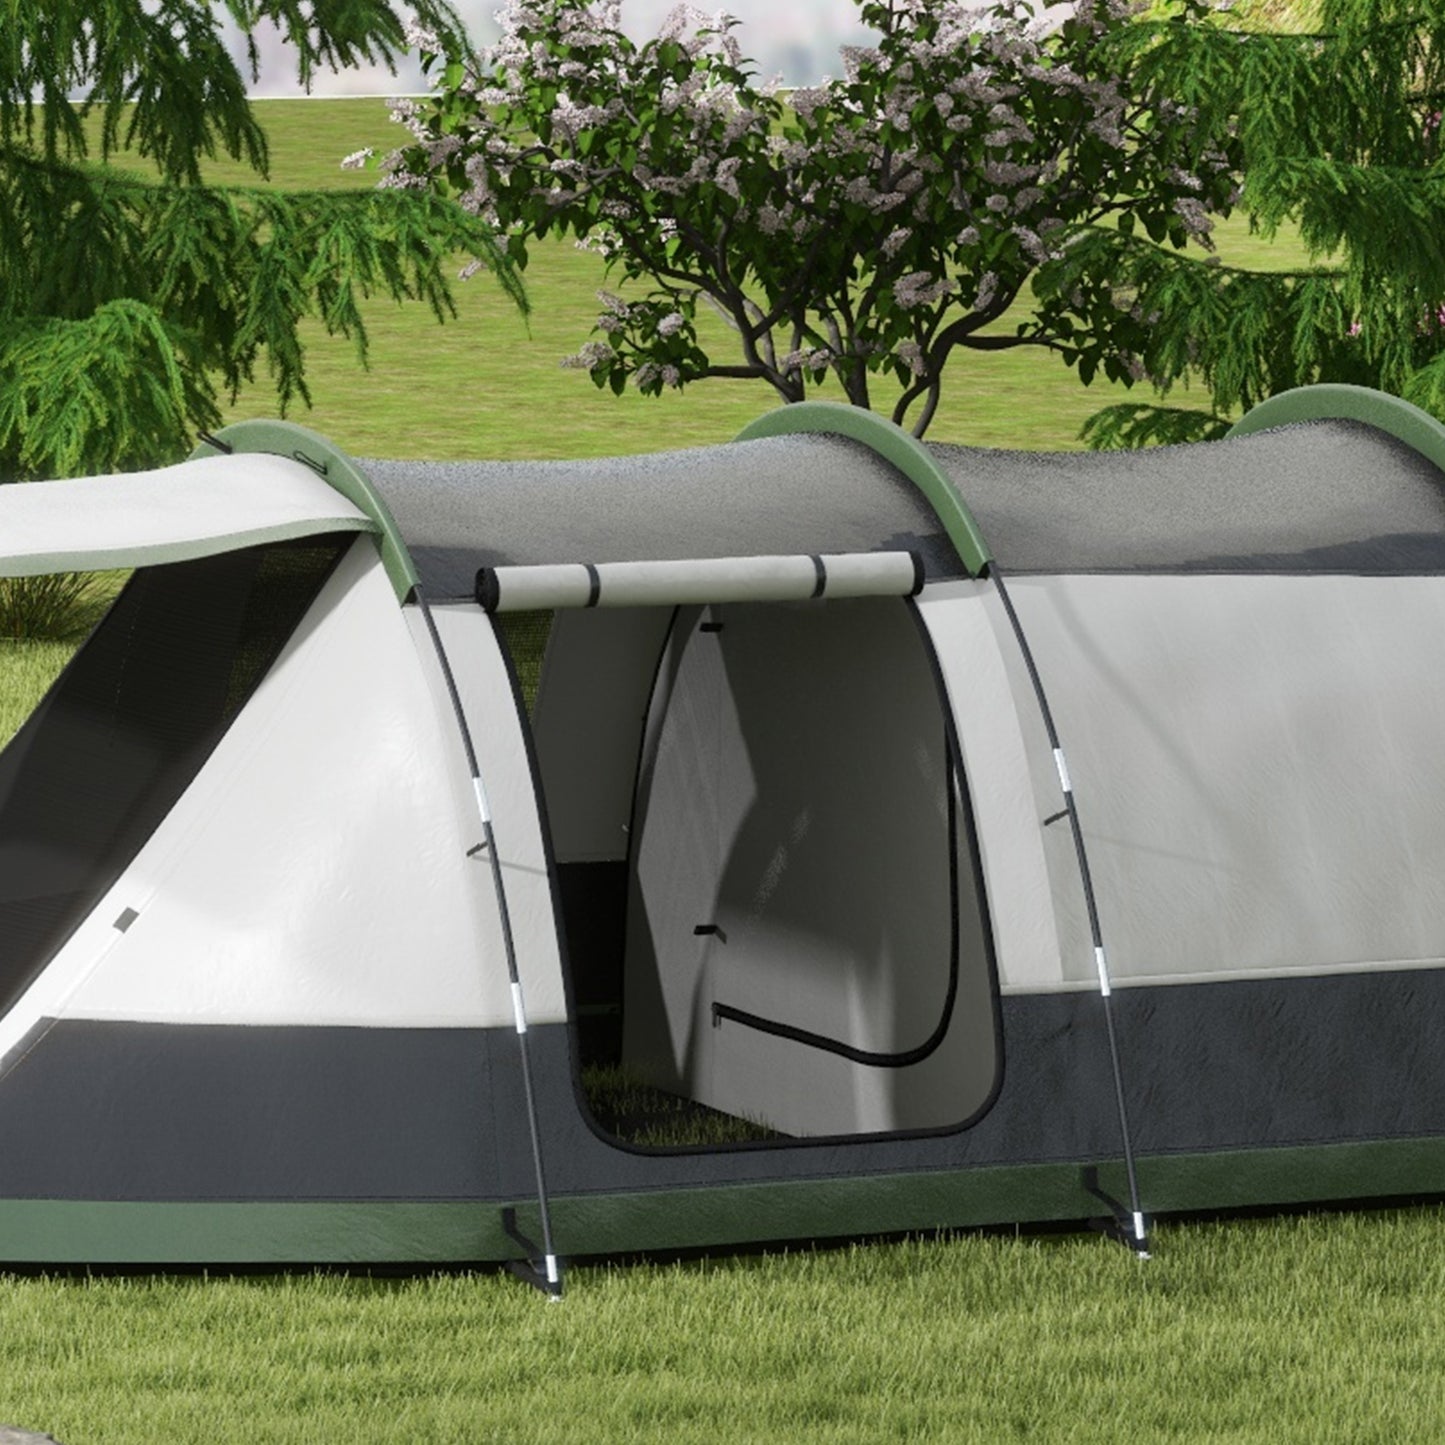 Outsunny 3-4 Man Camping Tent Family Tunnel Tent 2000mm Waterproof Portable with Bag Green